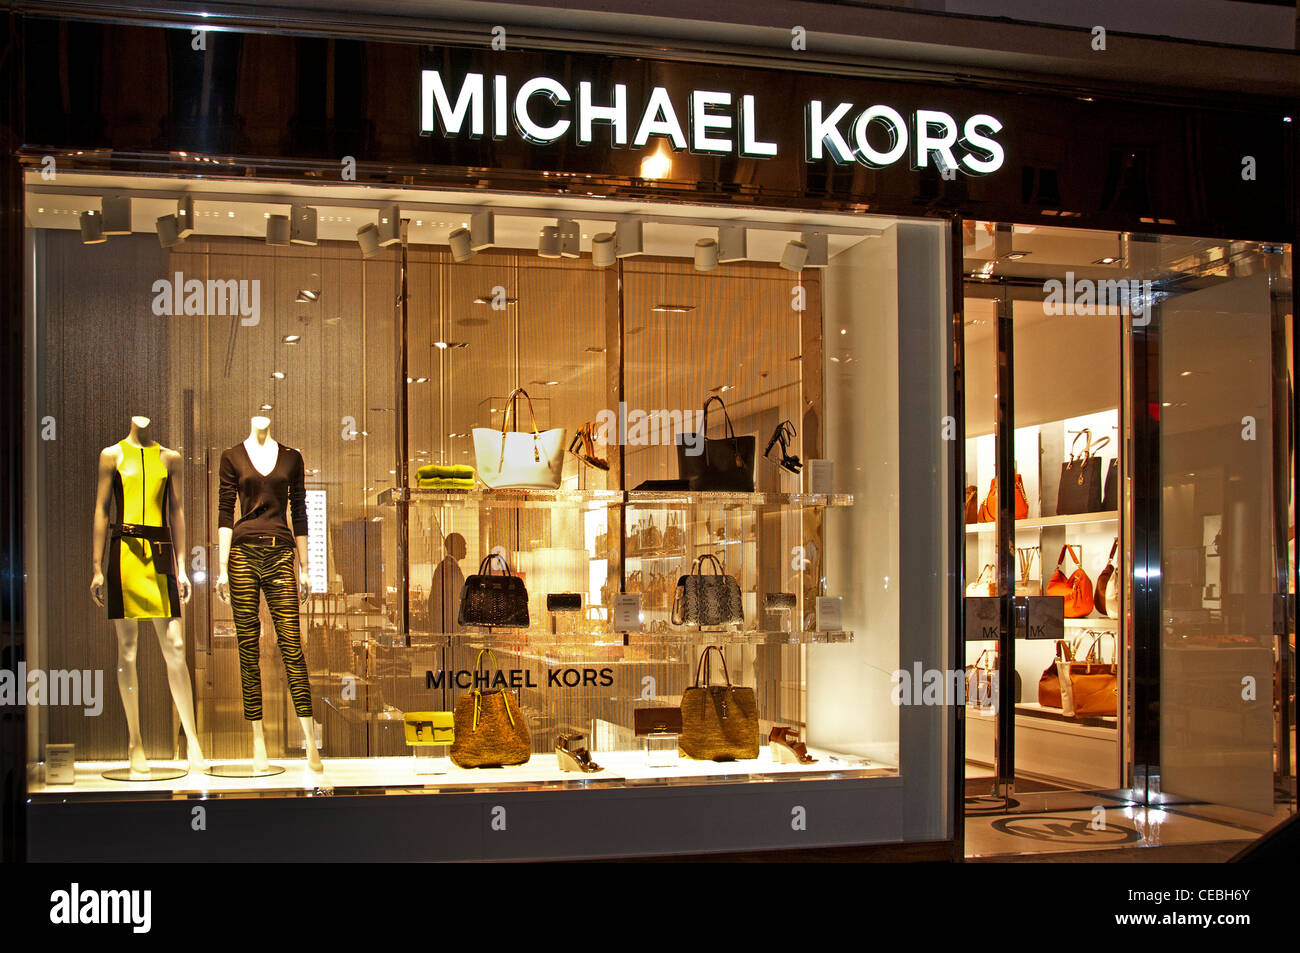 Michael Kors Fashion Store Shop High Resolution Stock Photography and  Images - Alamy